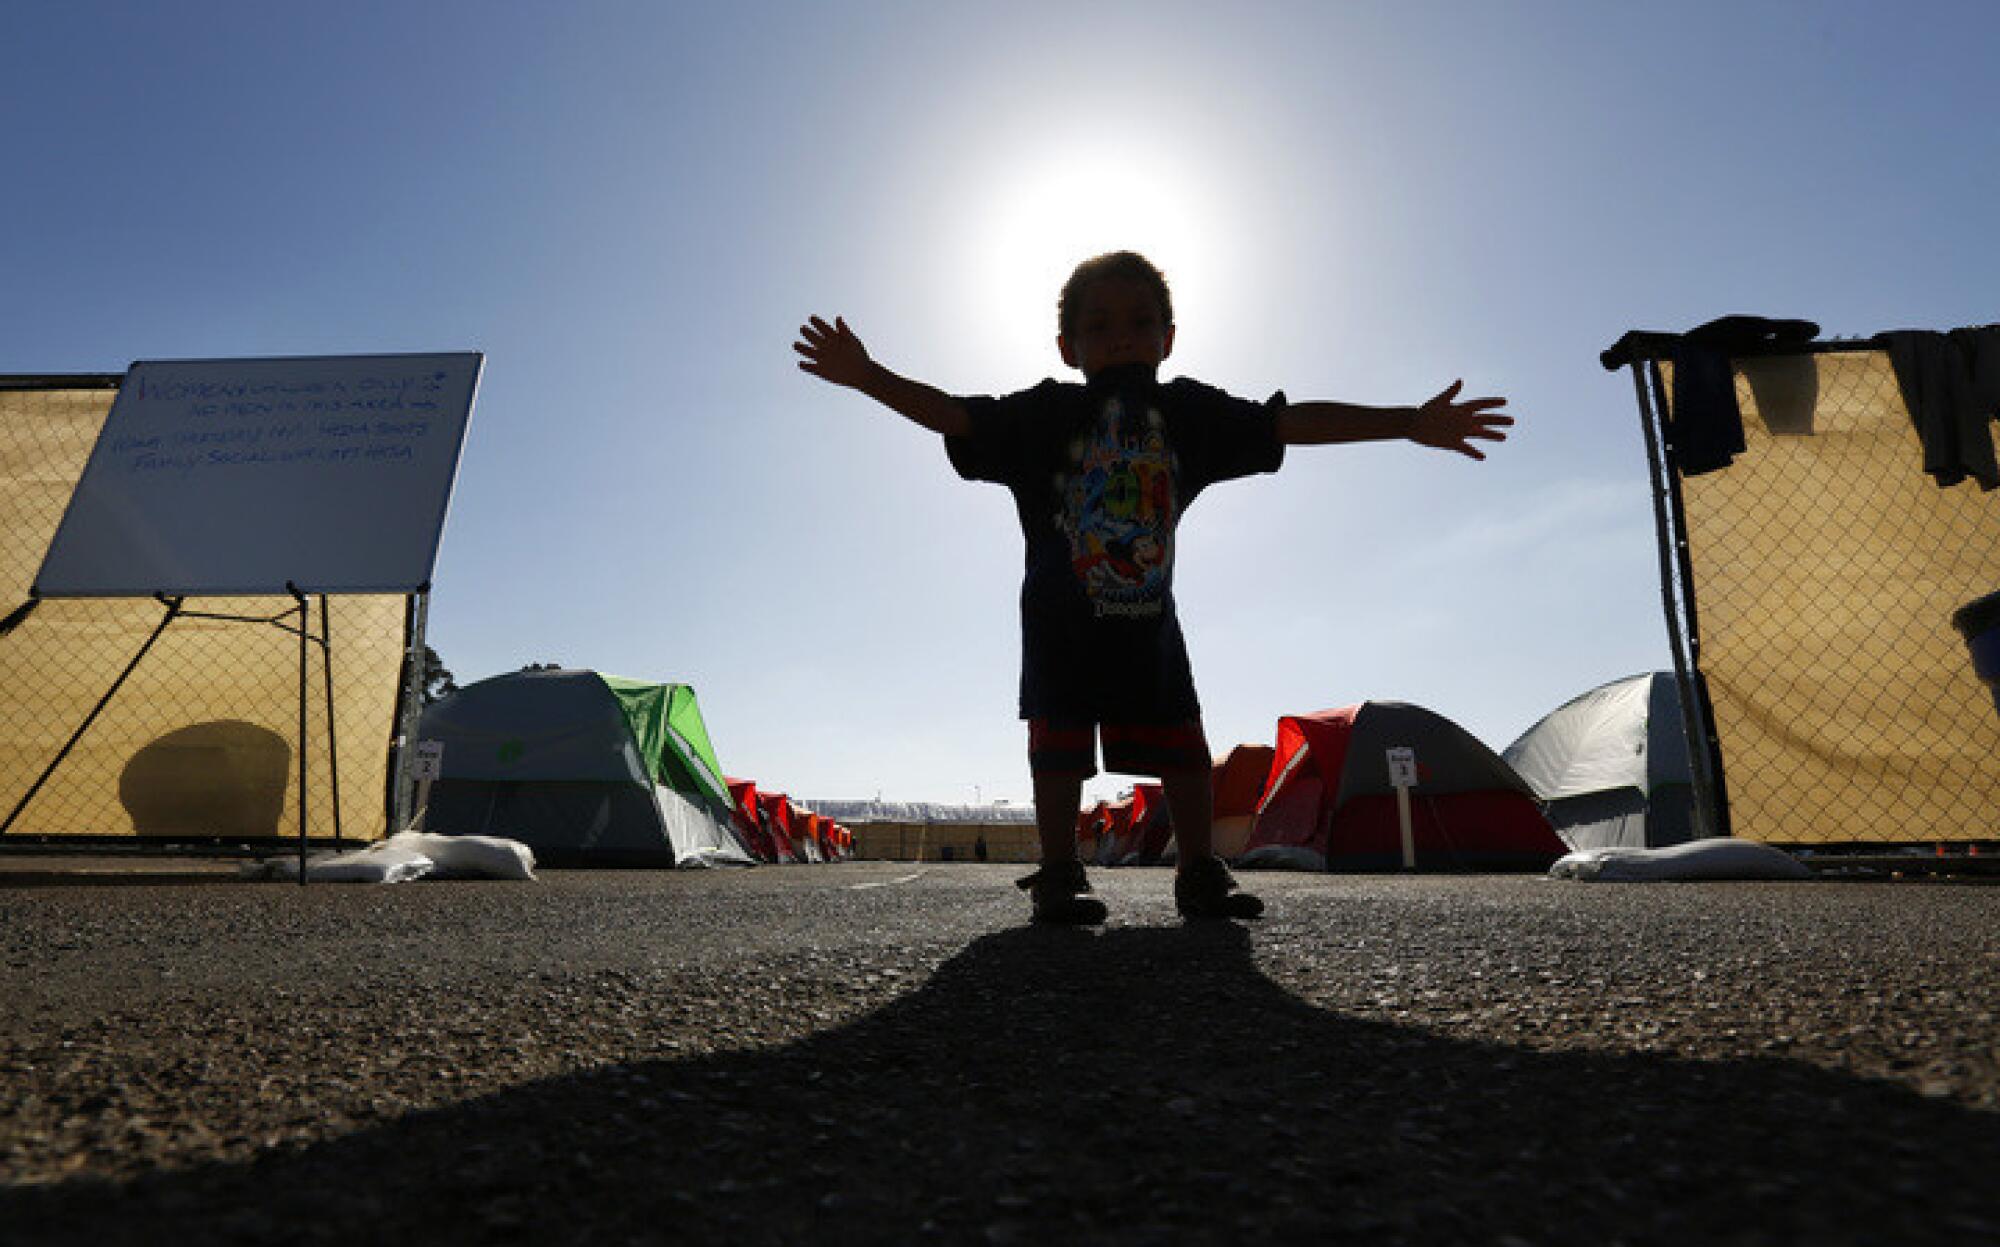 A child stands at the entrance to the women's section of the city-sanctioned homeless camp near Balboa Park Golf Course.